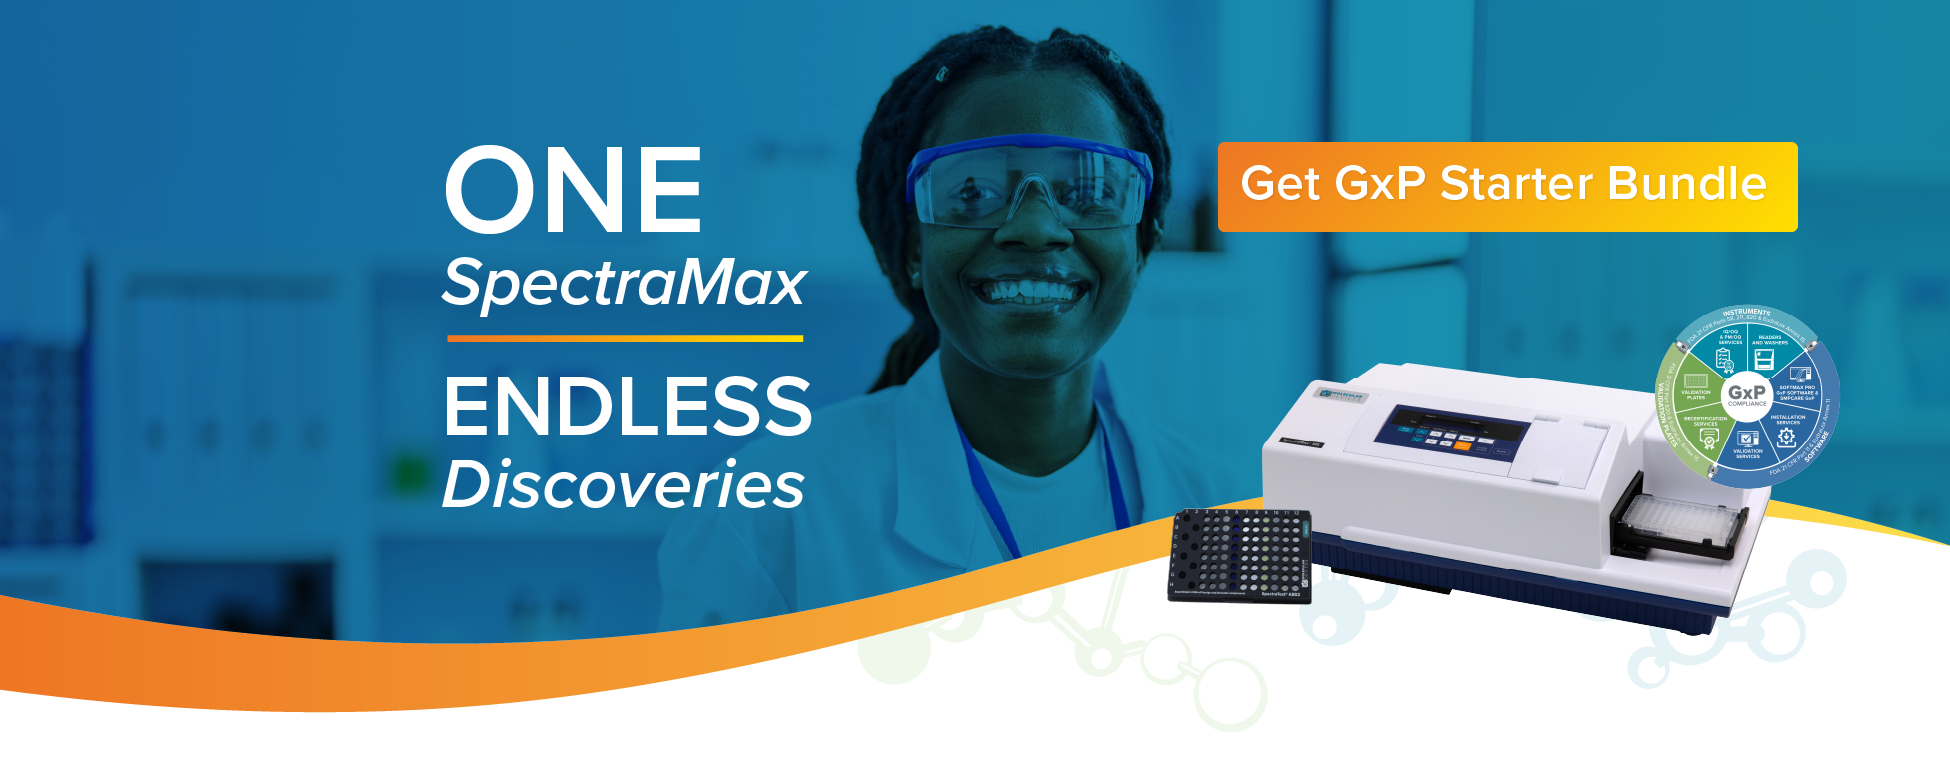 MD-IMG-One SpectraMax Infinite Discoveries-M series GxP starter bundle_1950x760 landing page header